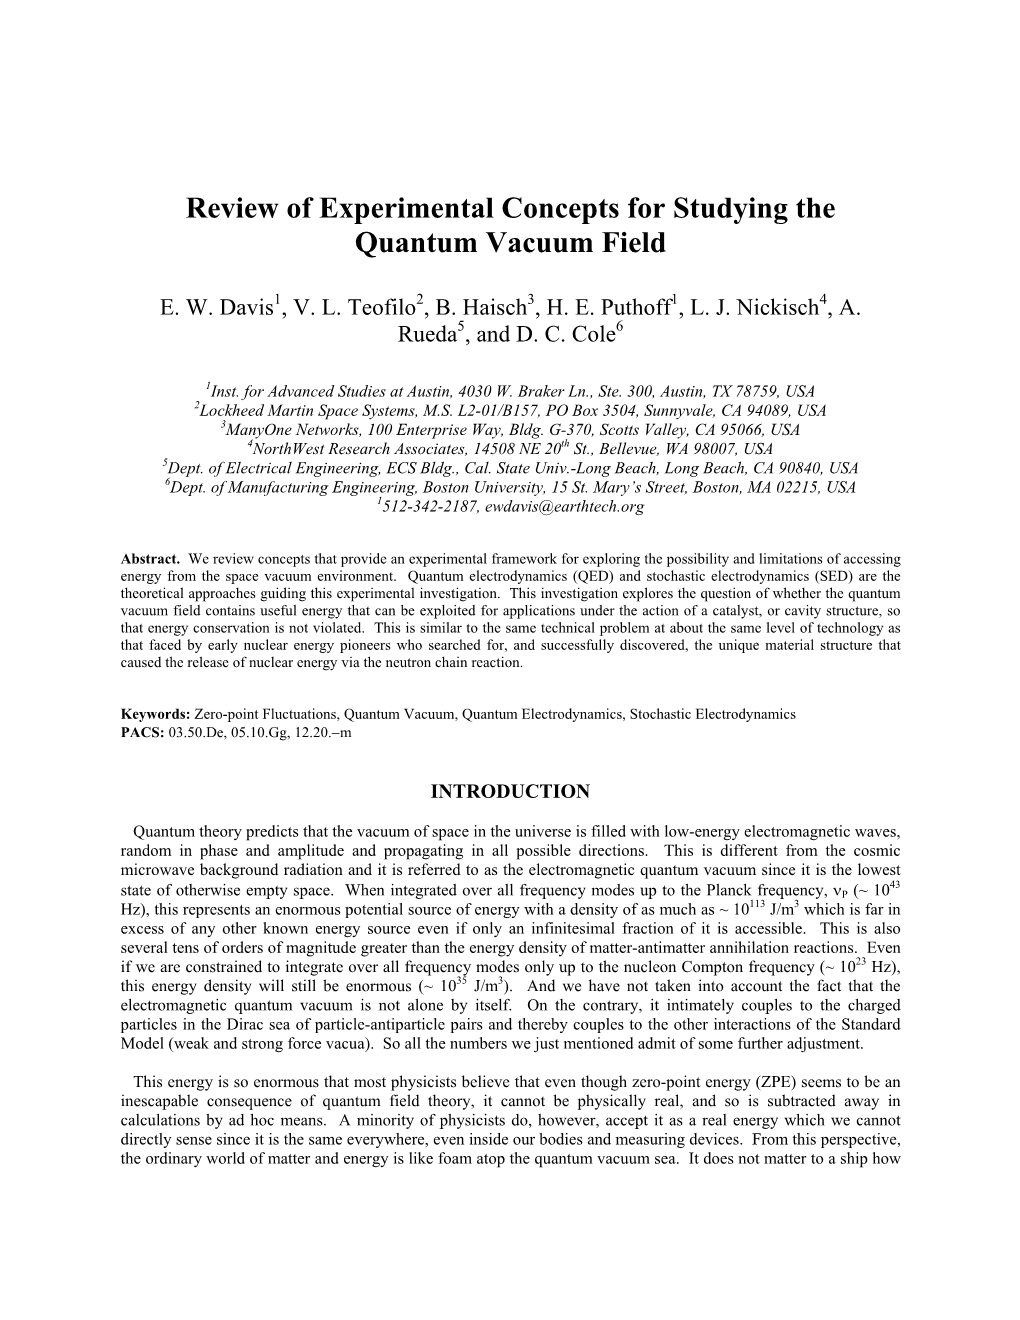 Review of Experimental Concepts for Studying the Quantum Vacuum Field